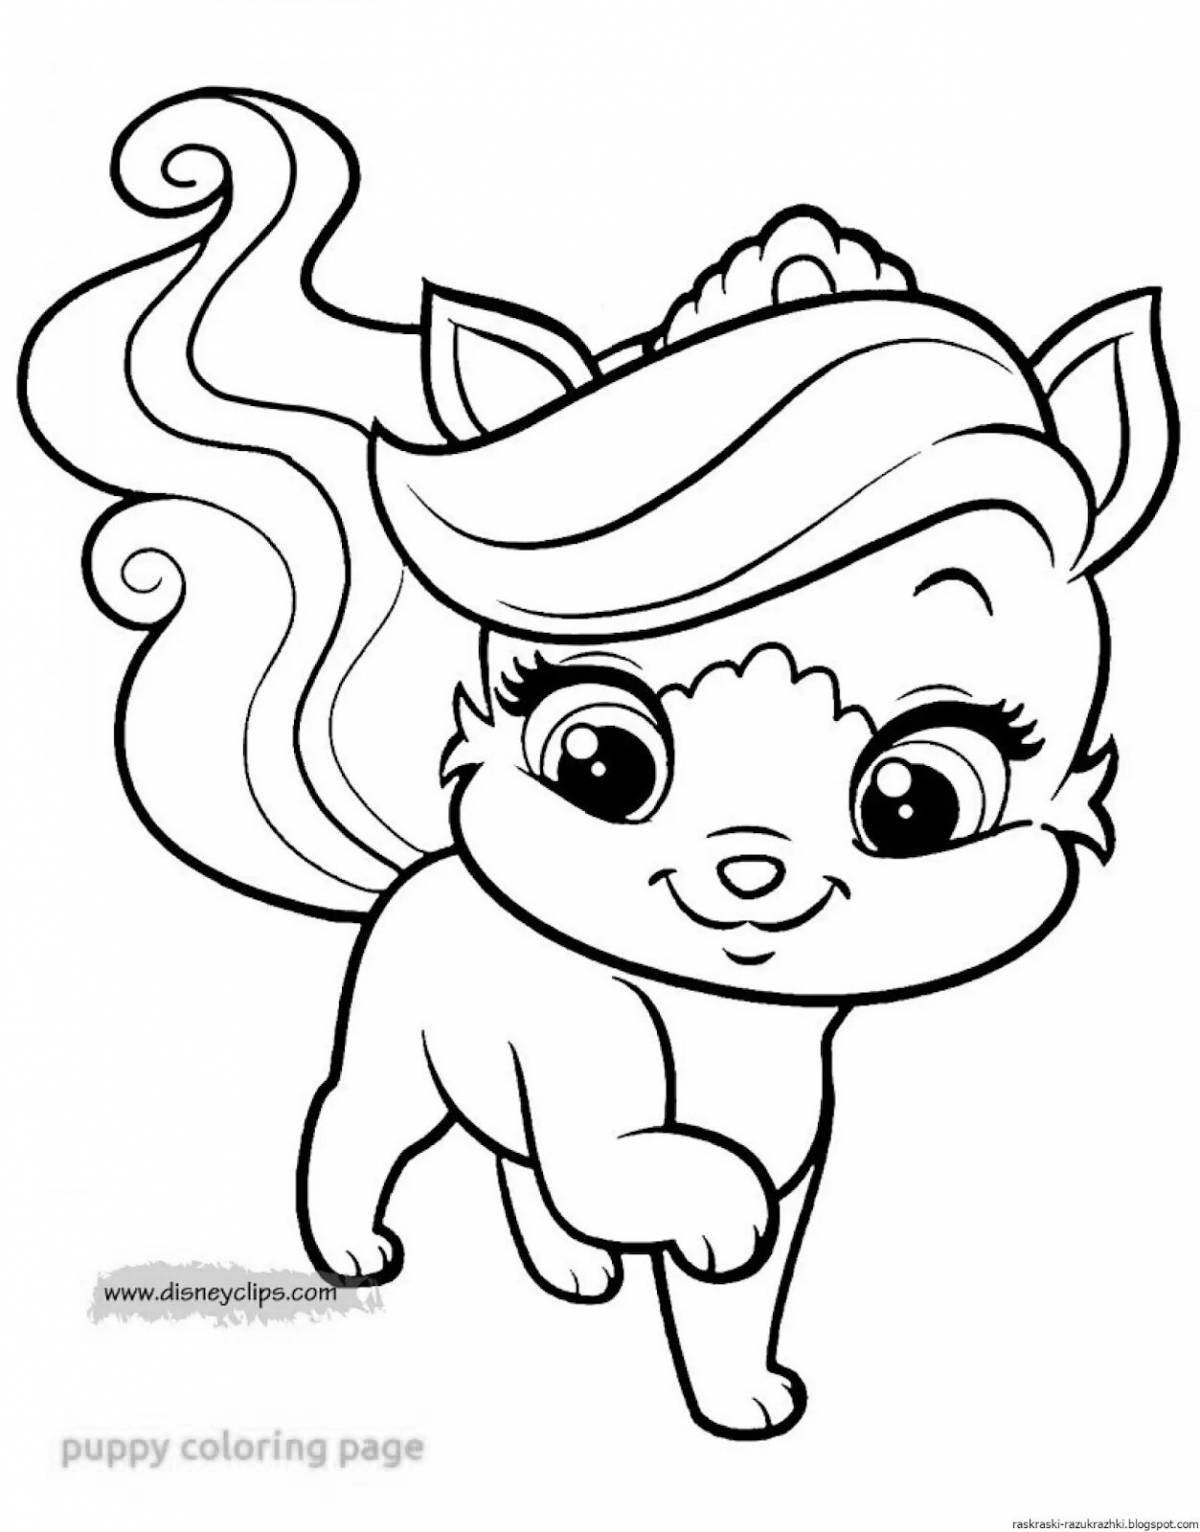 Puppies wiggly coloring page for girls